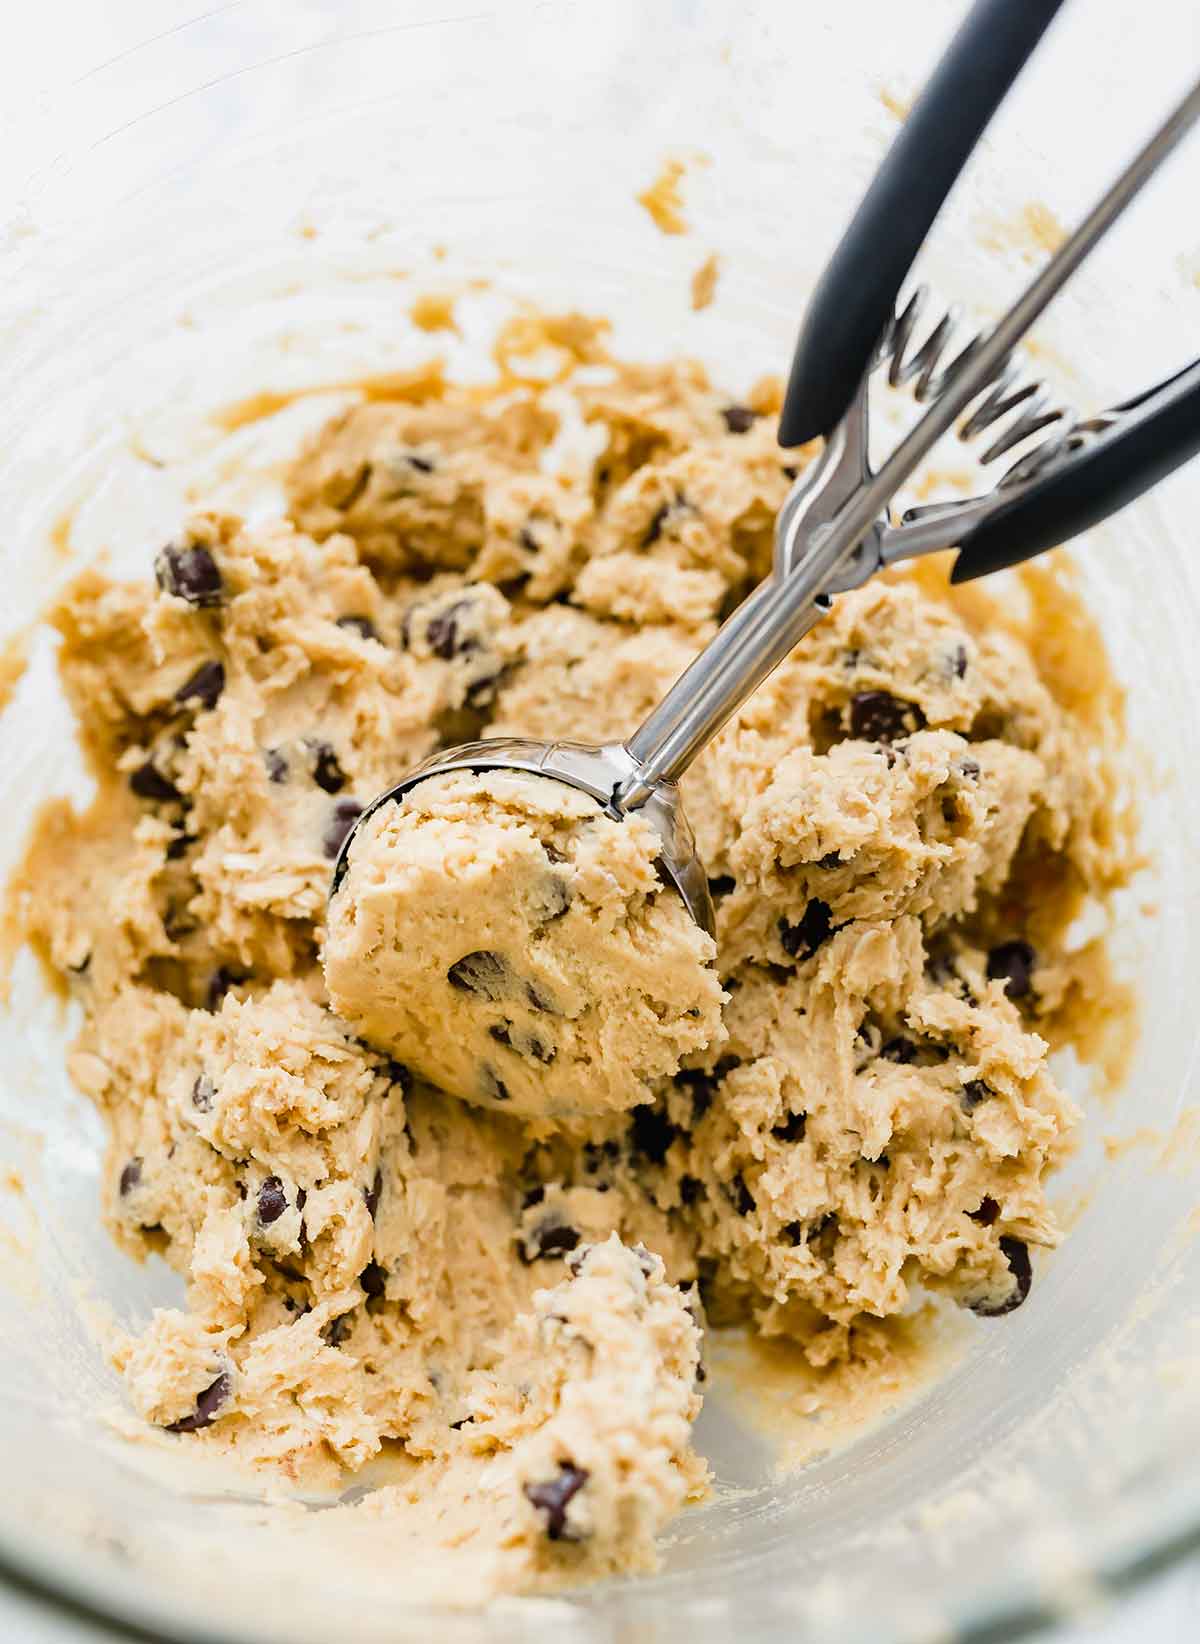 A cookie scoop sccoping cookie dough for peanut butter oatmeal chocolate chip cookies out of a glass bowl.